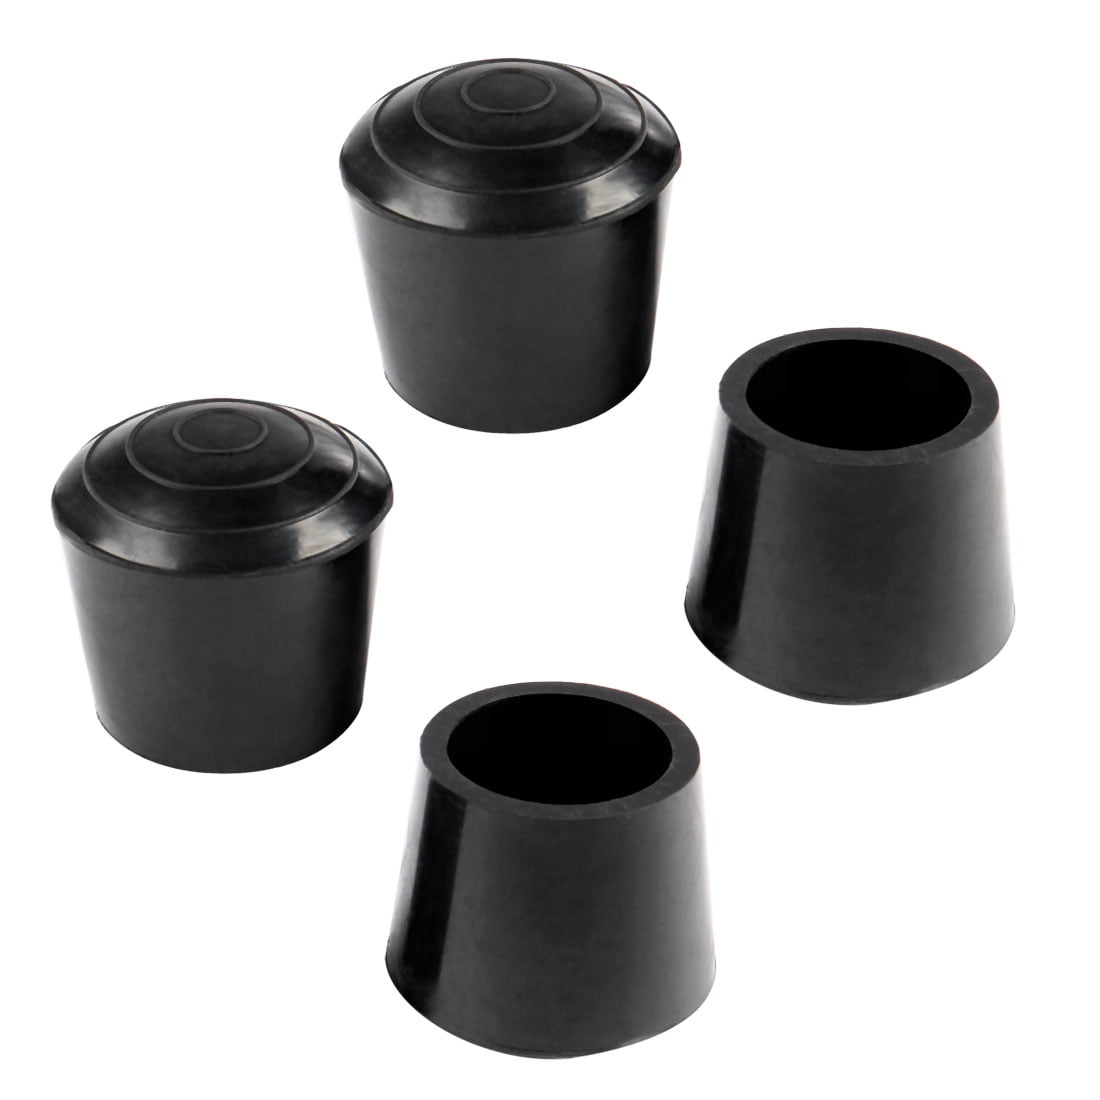 4pcs Black Rubber Machine Foot Pad Non-slip Furniture Table Conical Protector 